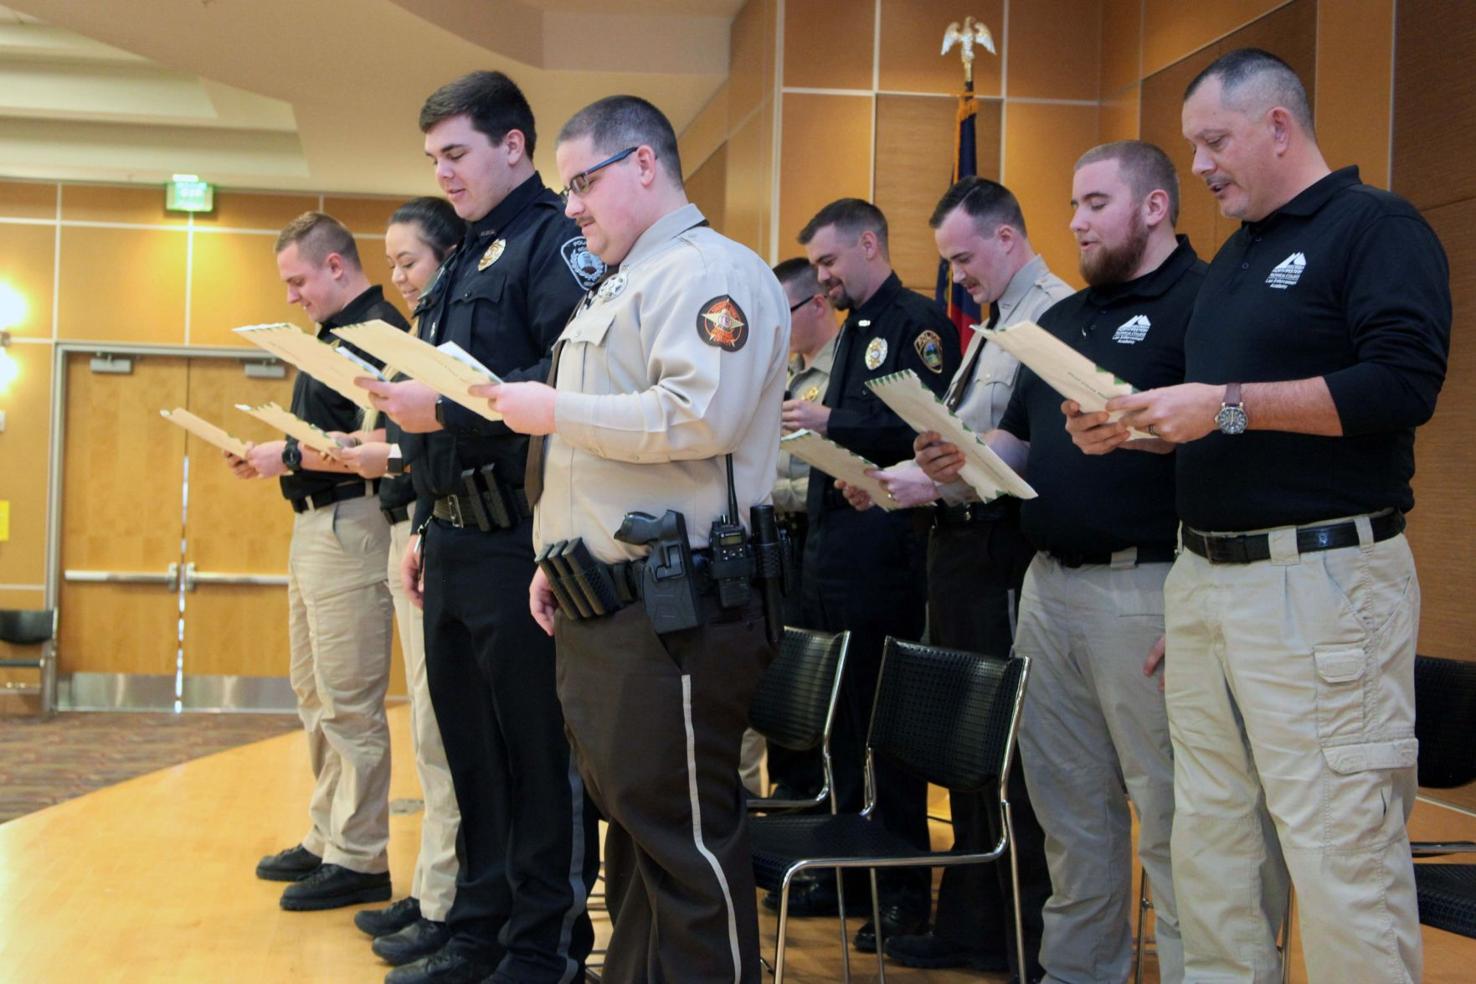 Gntc Law Enforcement Academy Swears In New Officers At Graduation Ceremony Education 2229